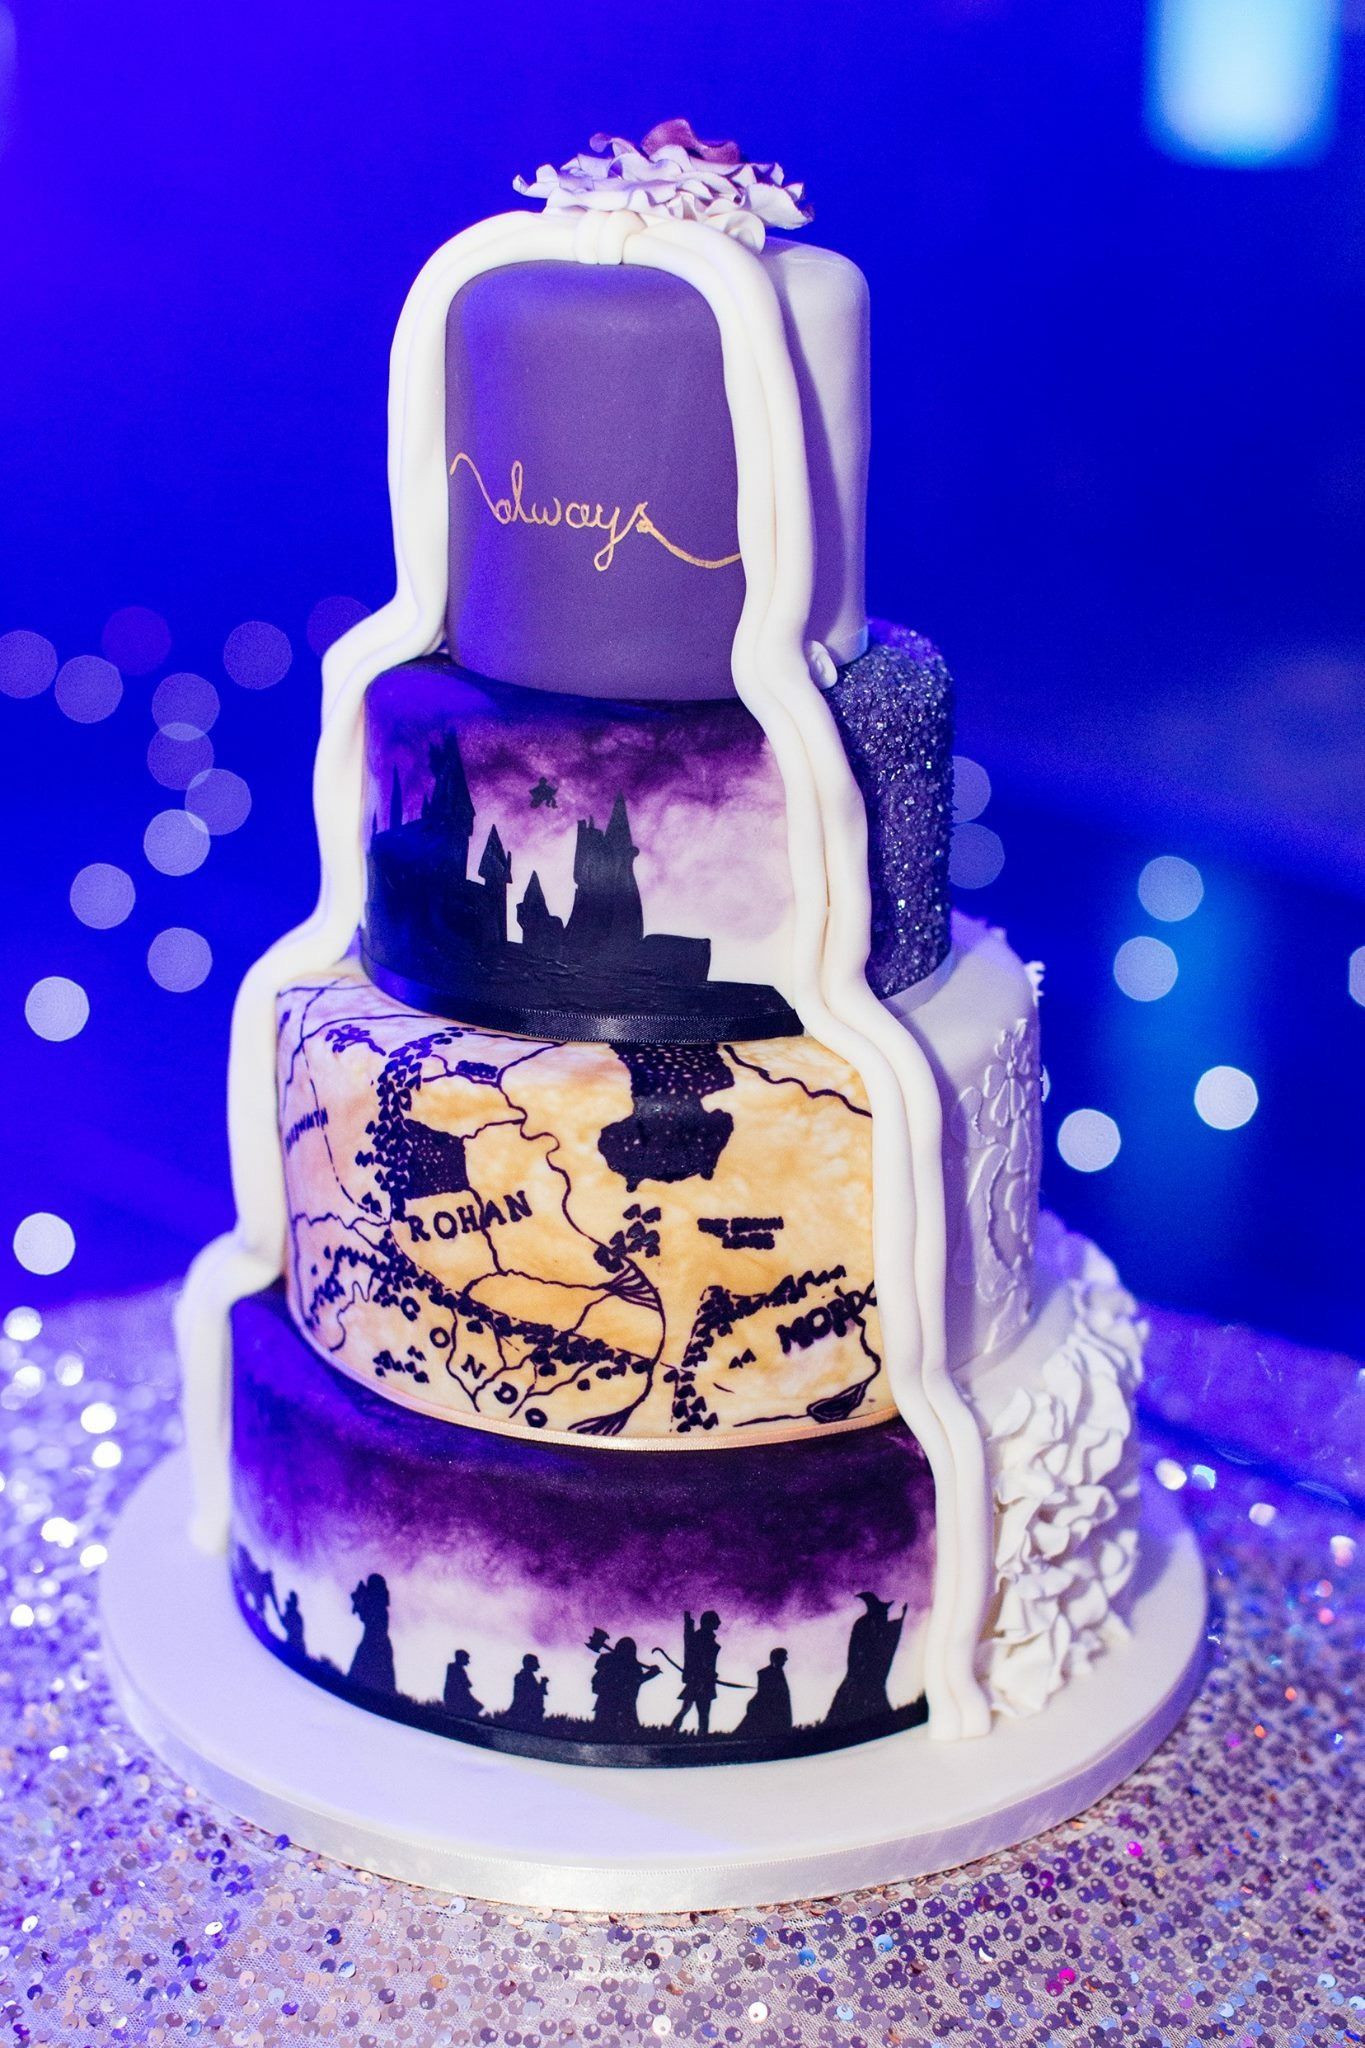 Lord Of The Rings Wedding Cake
 Harry Potter and lord of the rings wedding cake in 2019